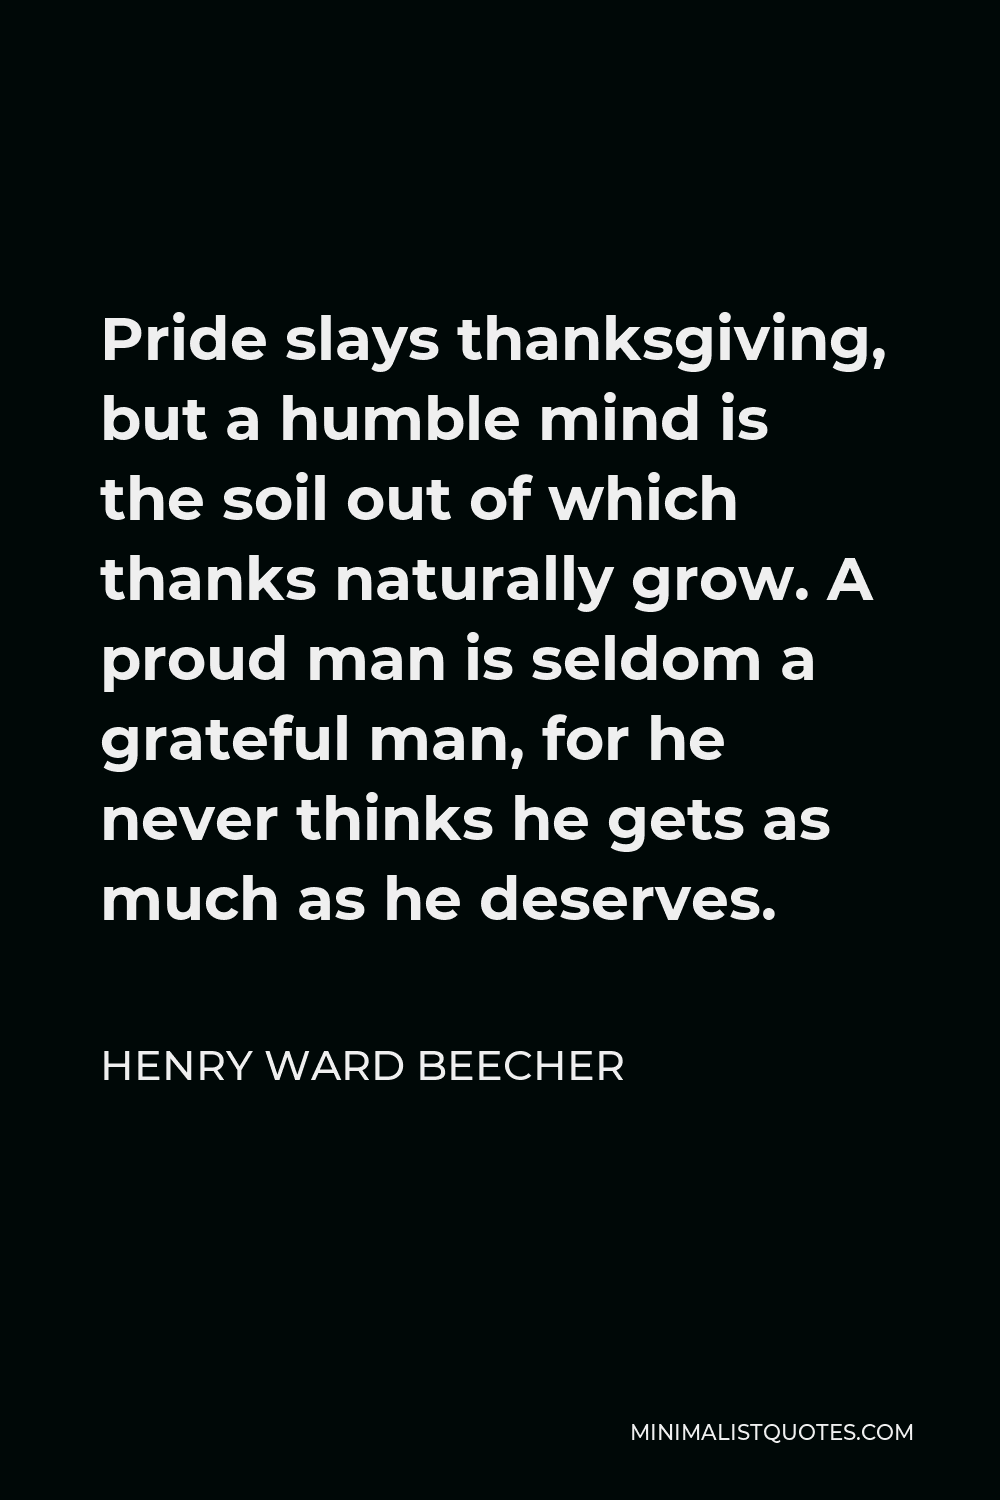 Henry Ward Beecher Quote - Pride slays thanksgiving, but a humble mind is the soil out of which thanks naturally grow. A proud man is seldom a grateful man, for he never thinks he gets as much as he deserves.